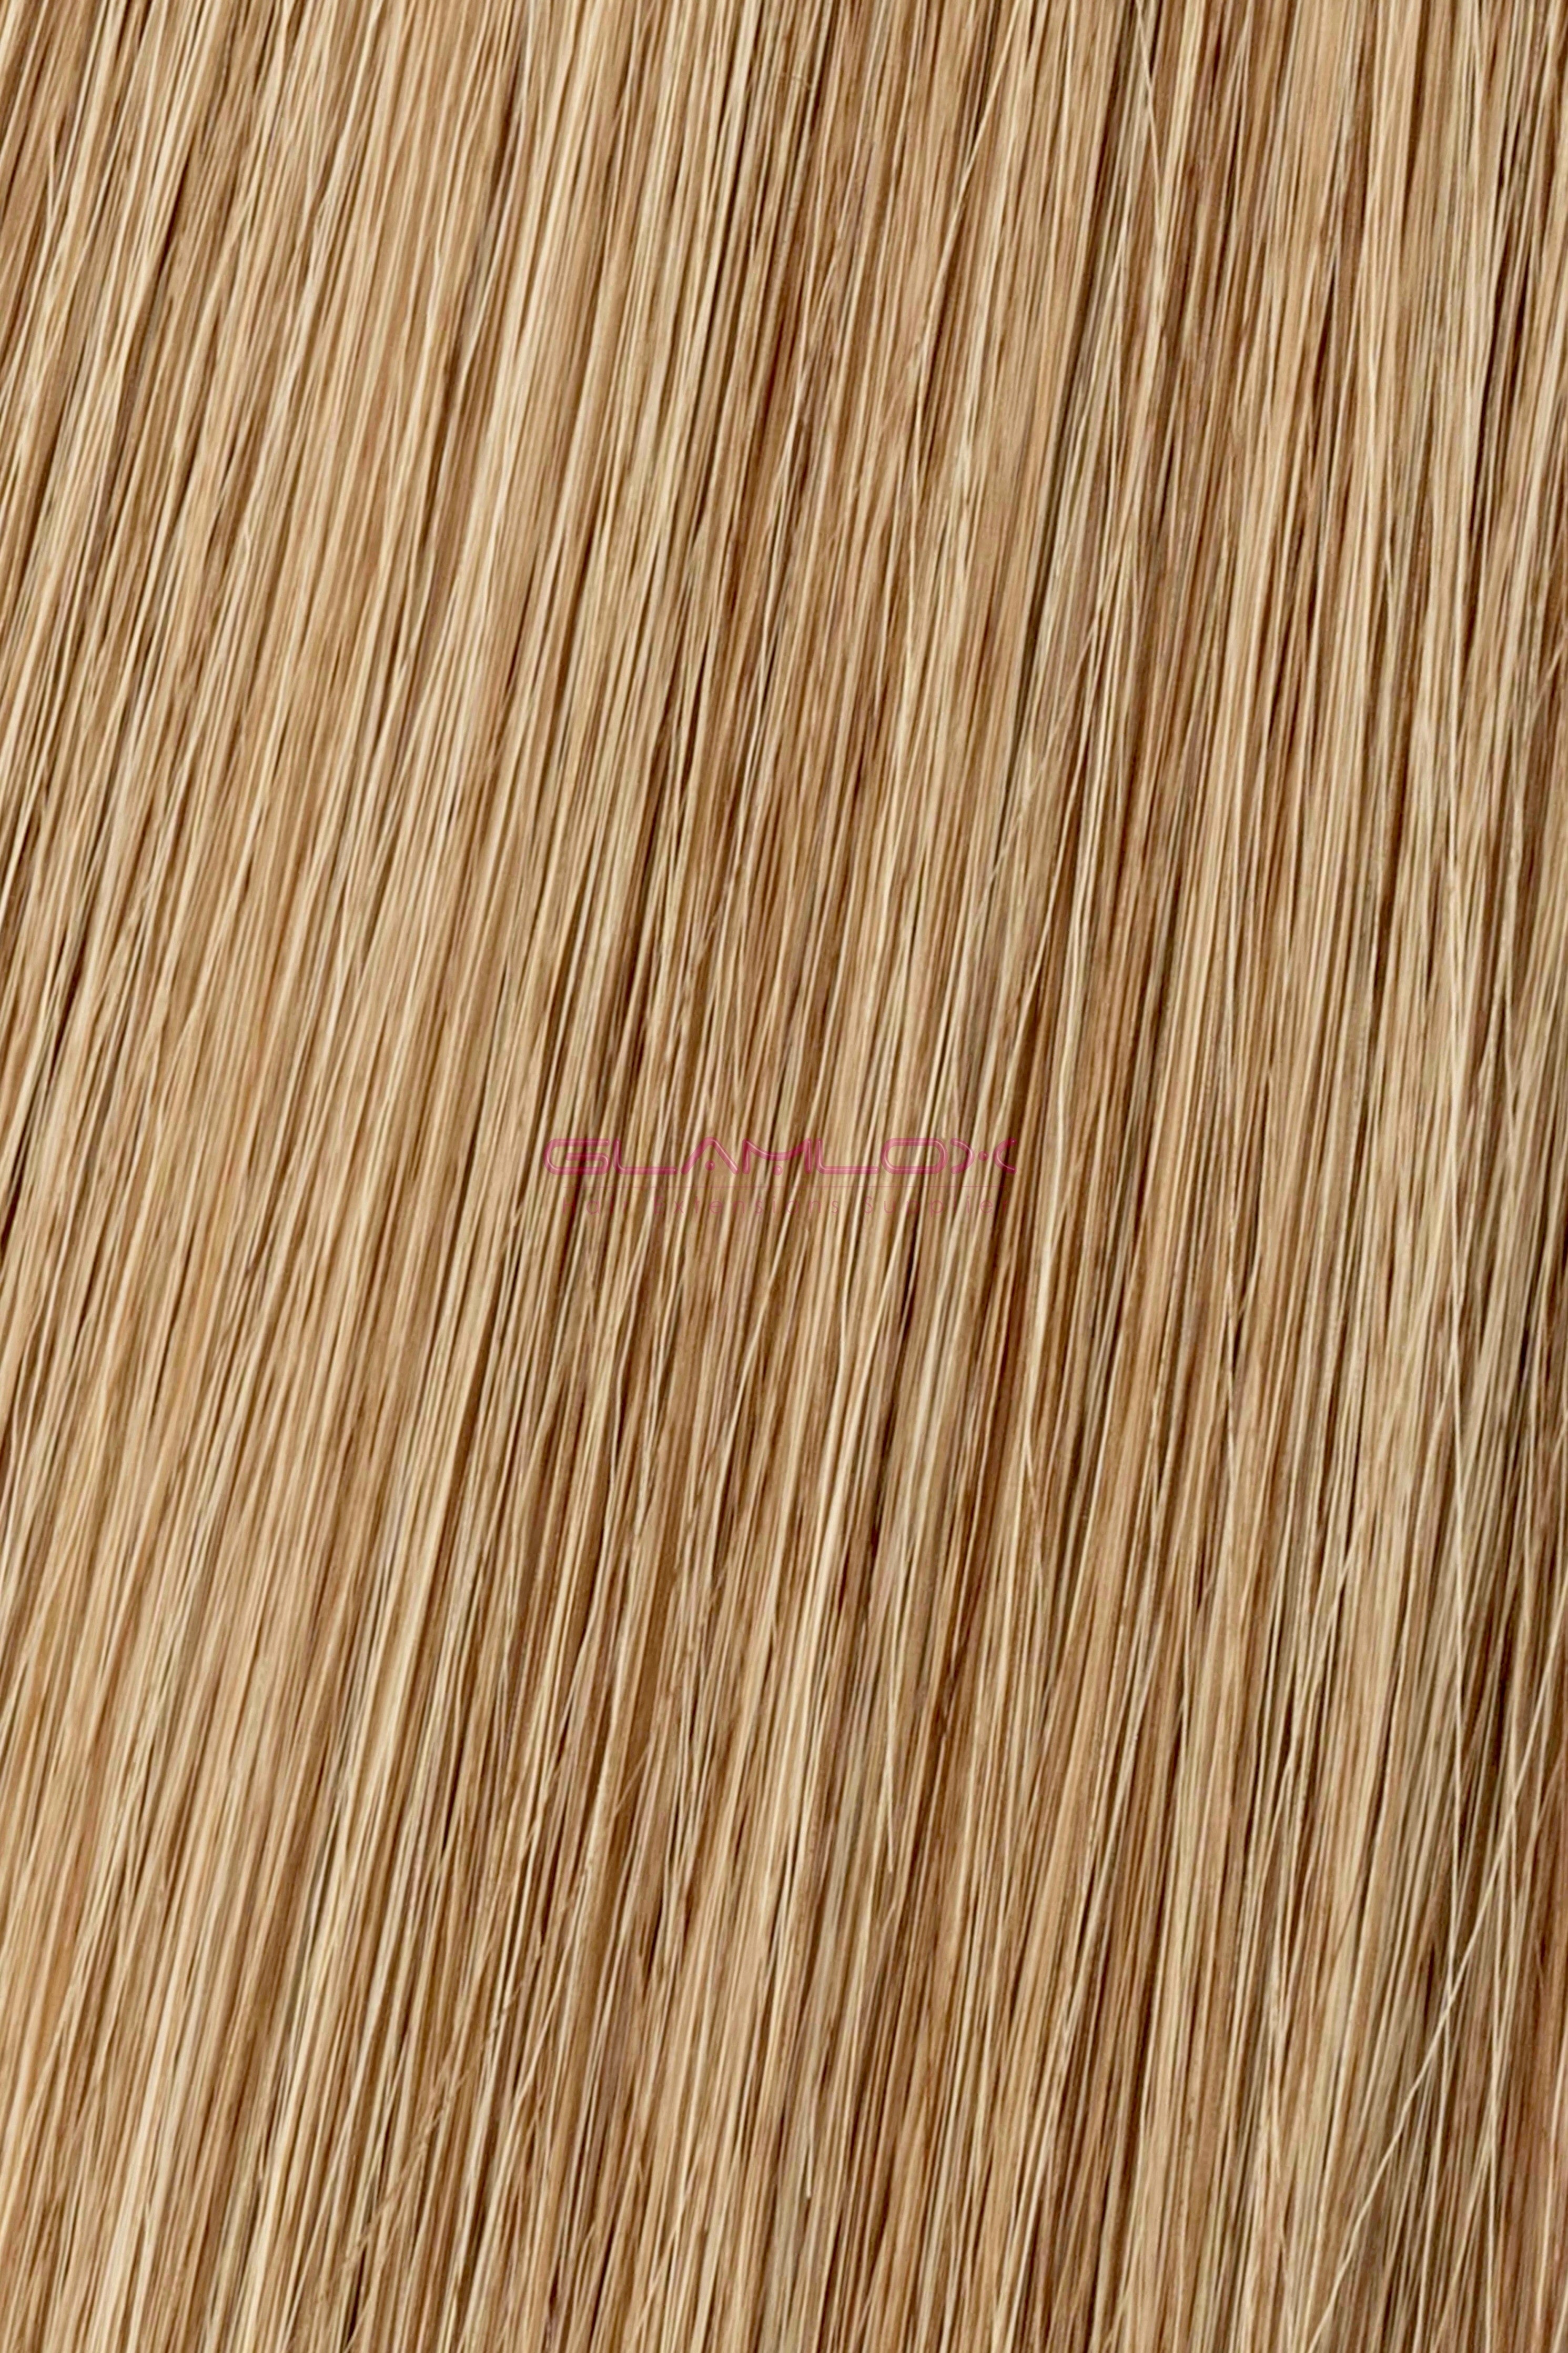 14" Nano Ring Hair Extensions - Russian Mongolian Double Drawn Remy Human Hair - 20 Strands